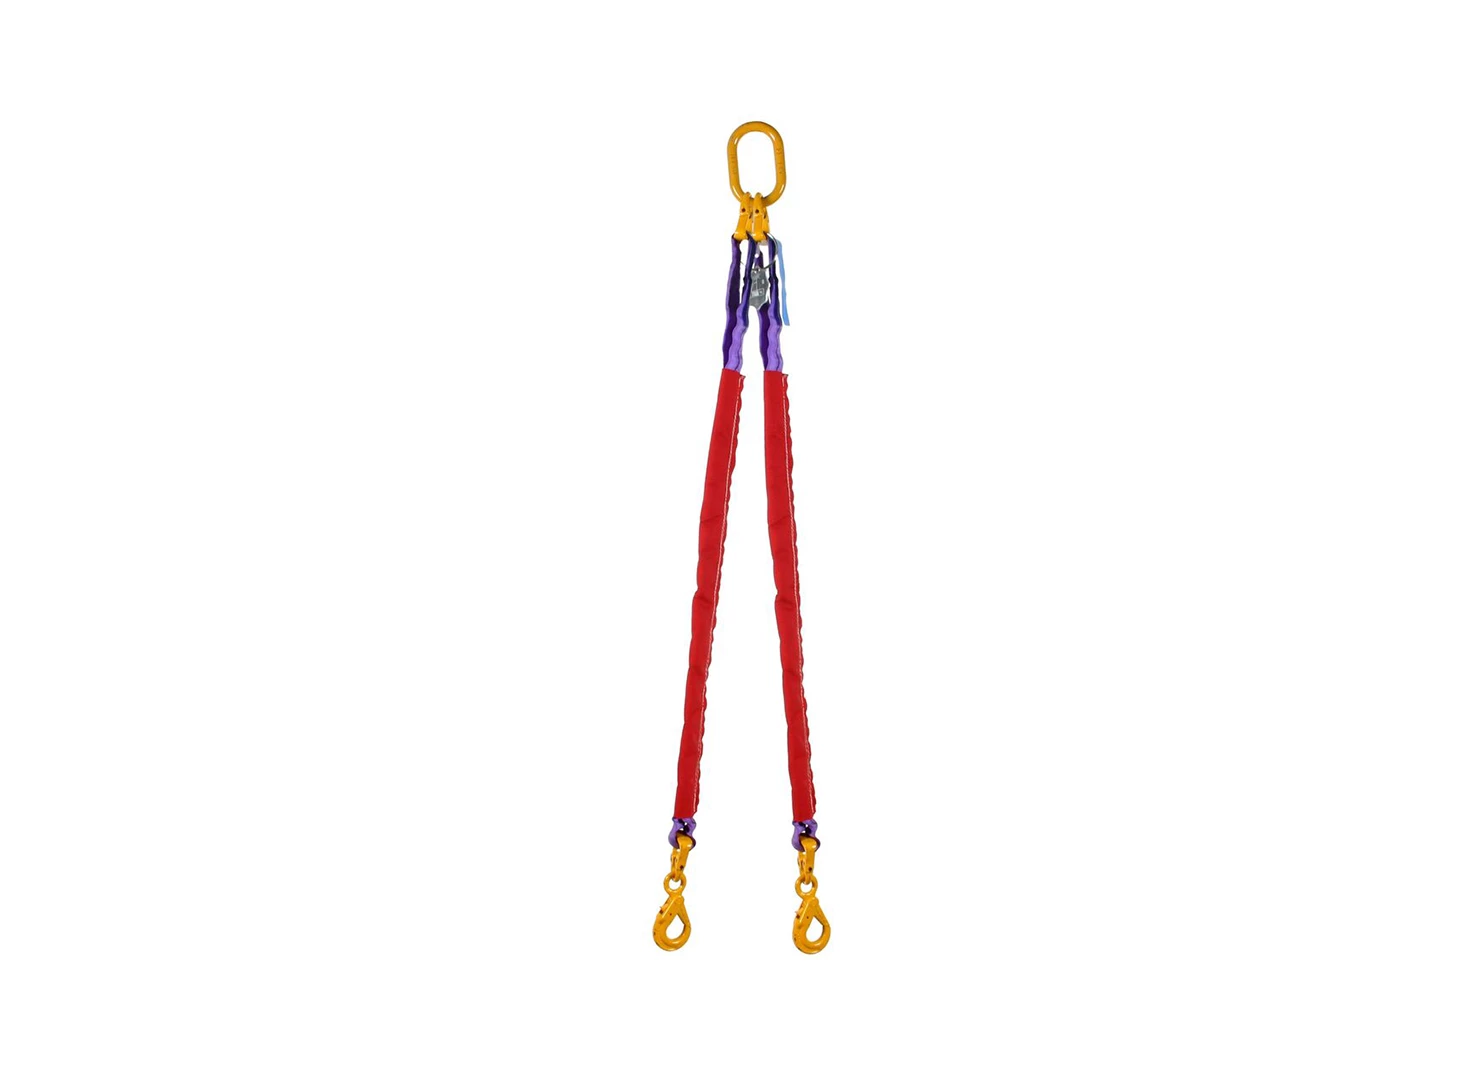 Product: Round slings 4 6.3t*3,3m